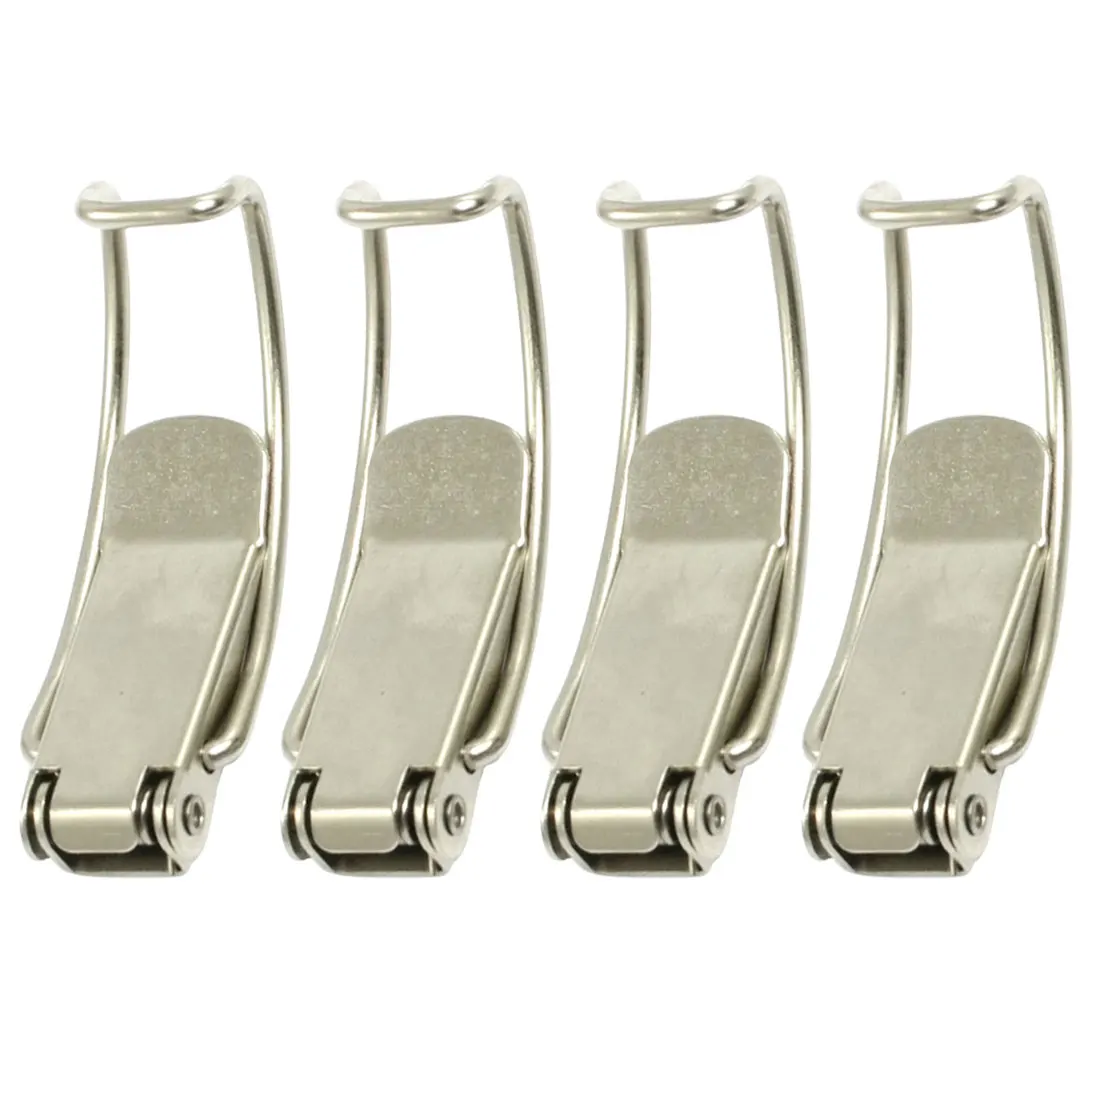 

UXCELL Hot Sale 4 Pcs/lot 4mm Hole Dia Box Chest Case Spring Loaded Draw Toggle Latch 8.5 x 2.3 x 1.5cm Silver Tone